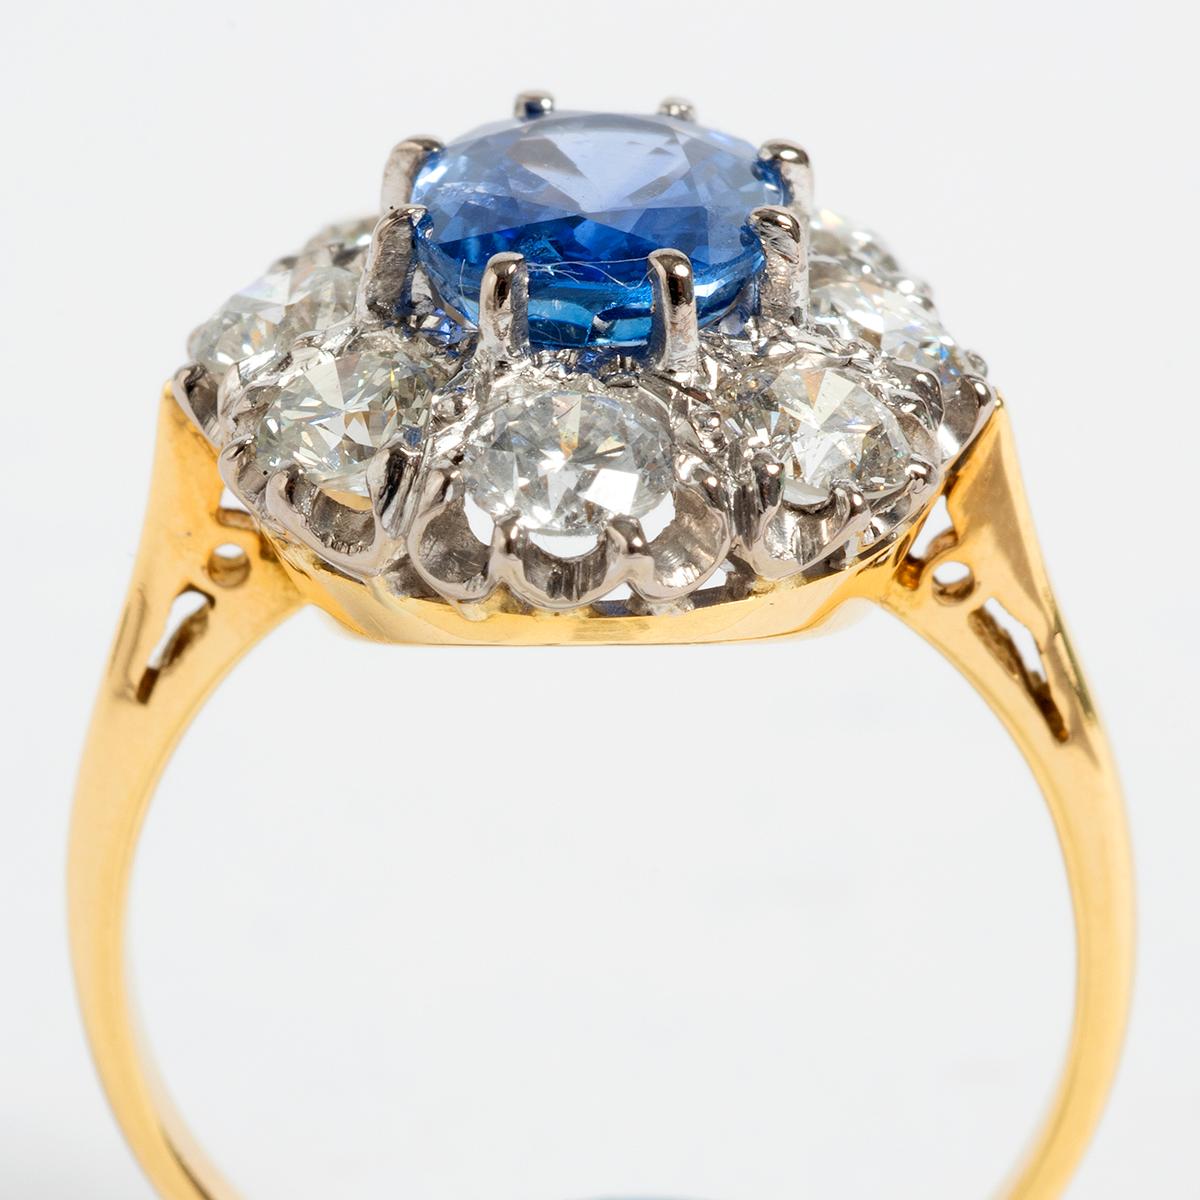 Mixed Cut Sapphire (est 1.58ct) & 8 x Diamond (est 1.75ct) Cluster Ring, 18K Yellow Gold. For Sale